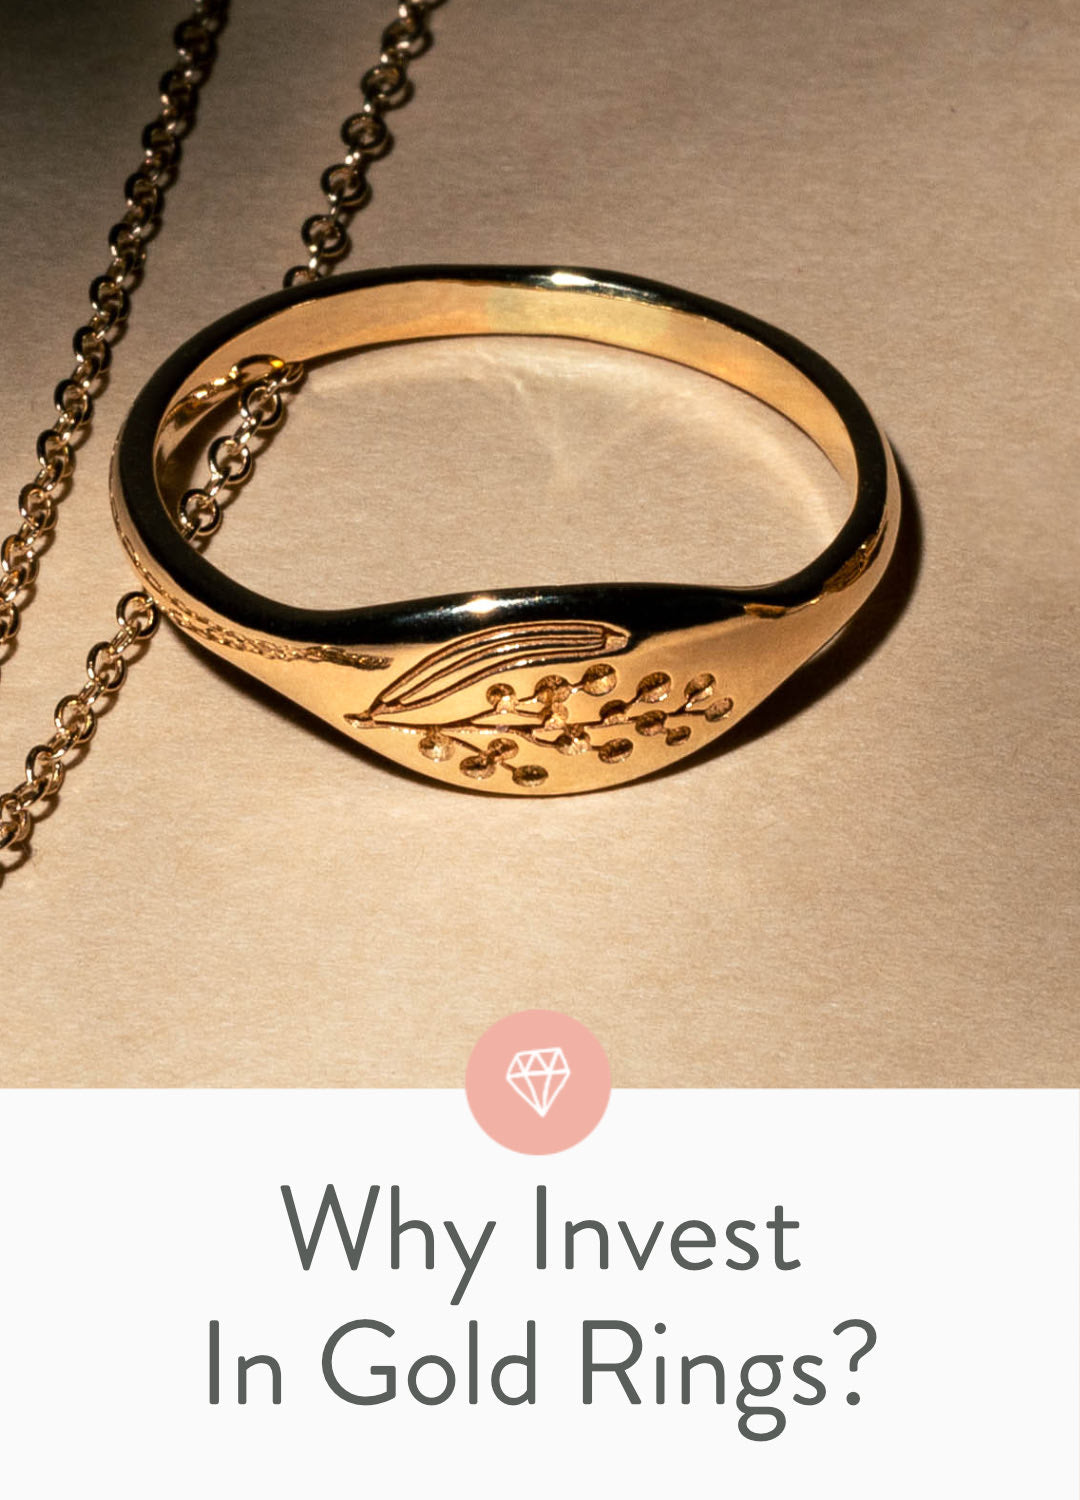 Why buy rings made in gold?